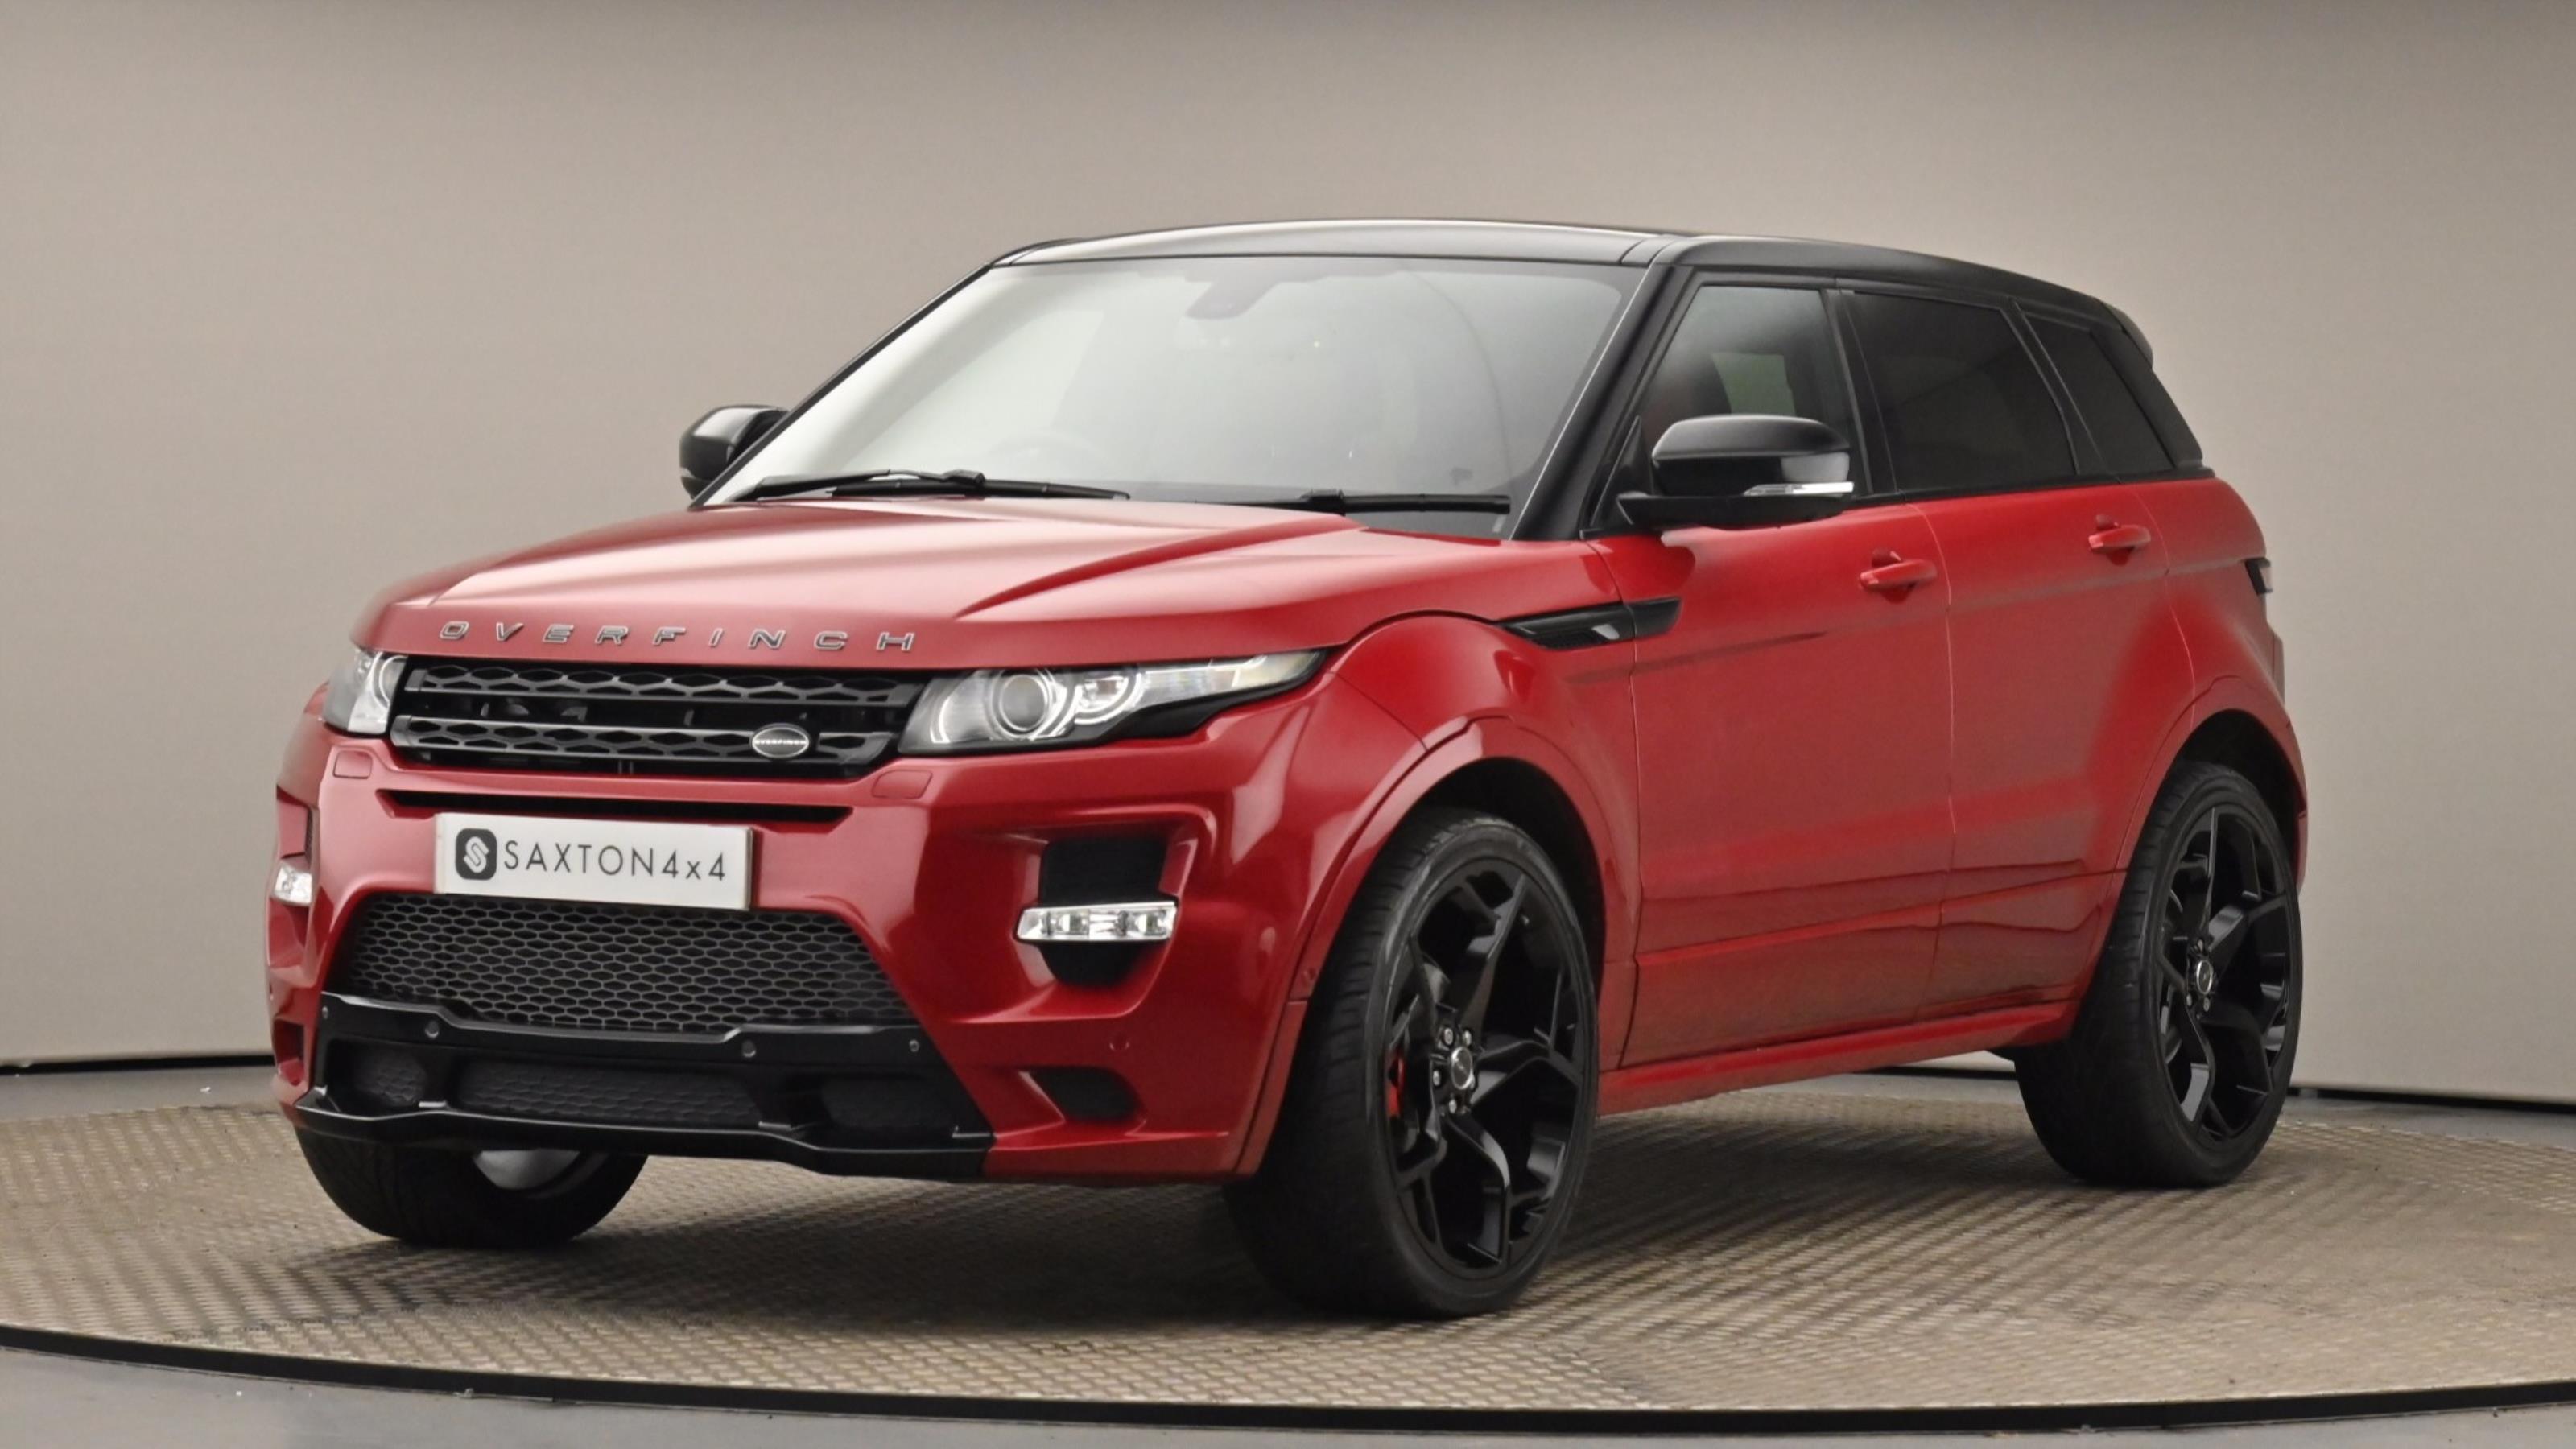 Used 2012 Land Rover RANGE ROVER EVOQUE 2.0 Si4 Dynamic 5dr Auto [Lux